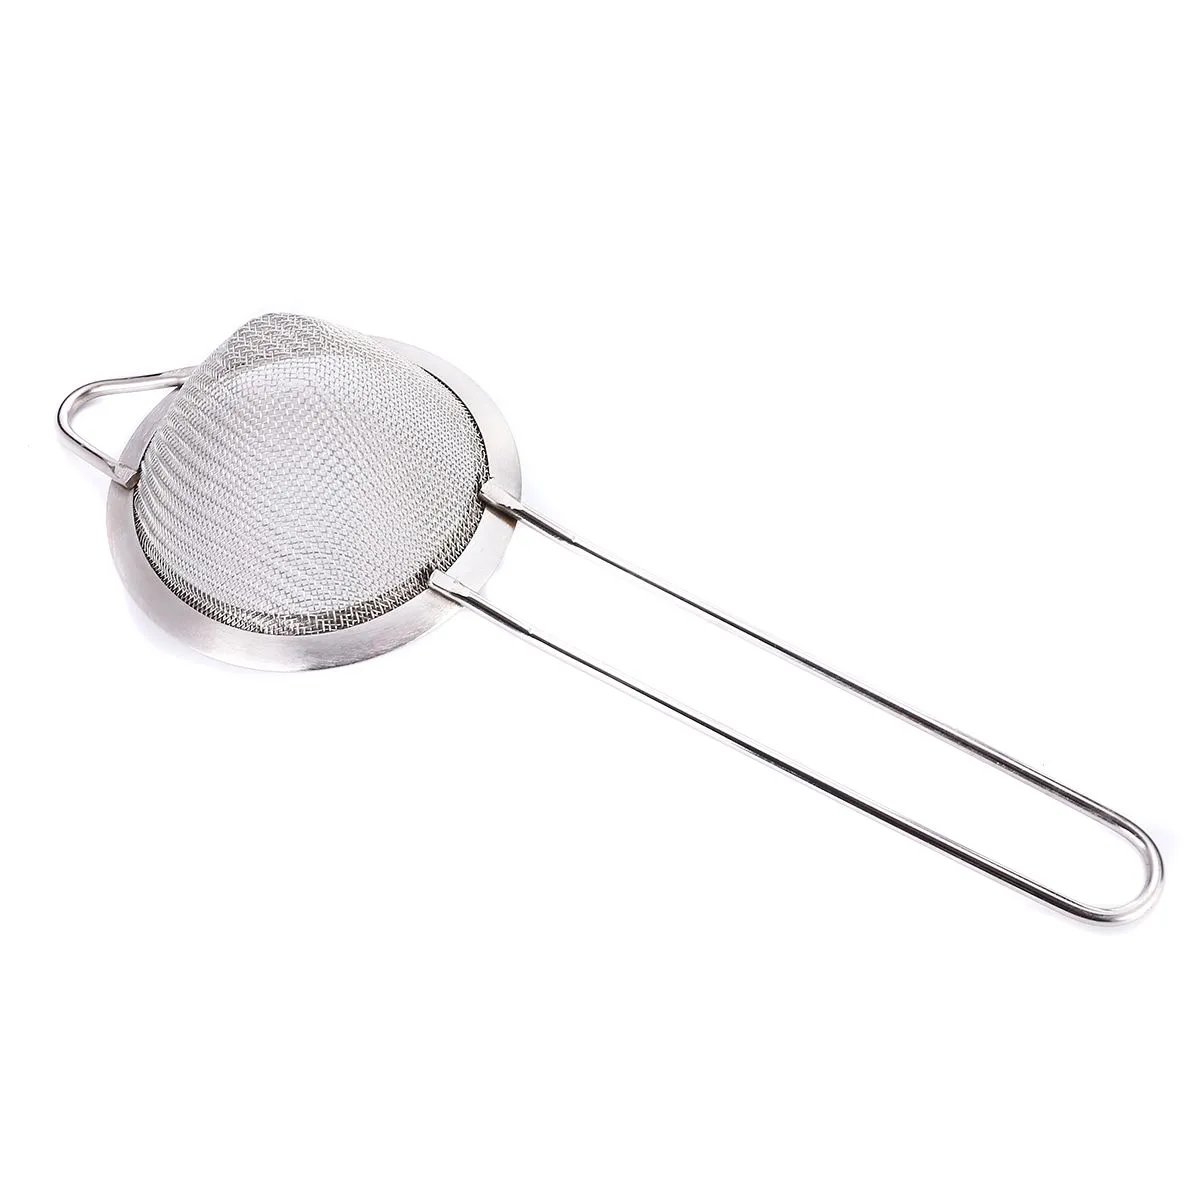 1pc Stainless Steel Wire Fine Mesh Cocktail Strainer Colander Sifter Sieve 20 x 7cm for Kitchen Tool Mayitr